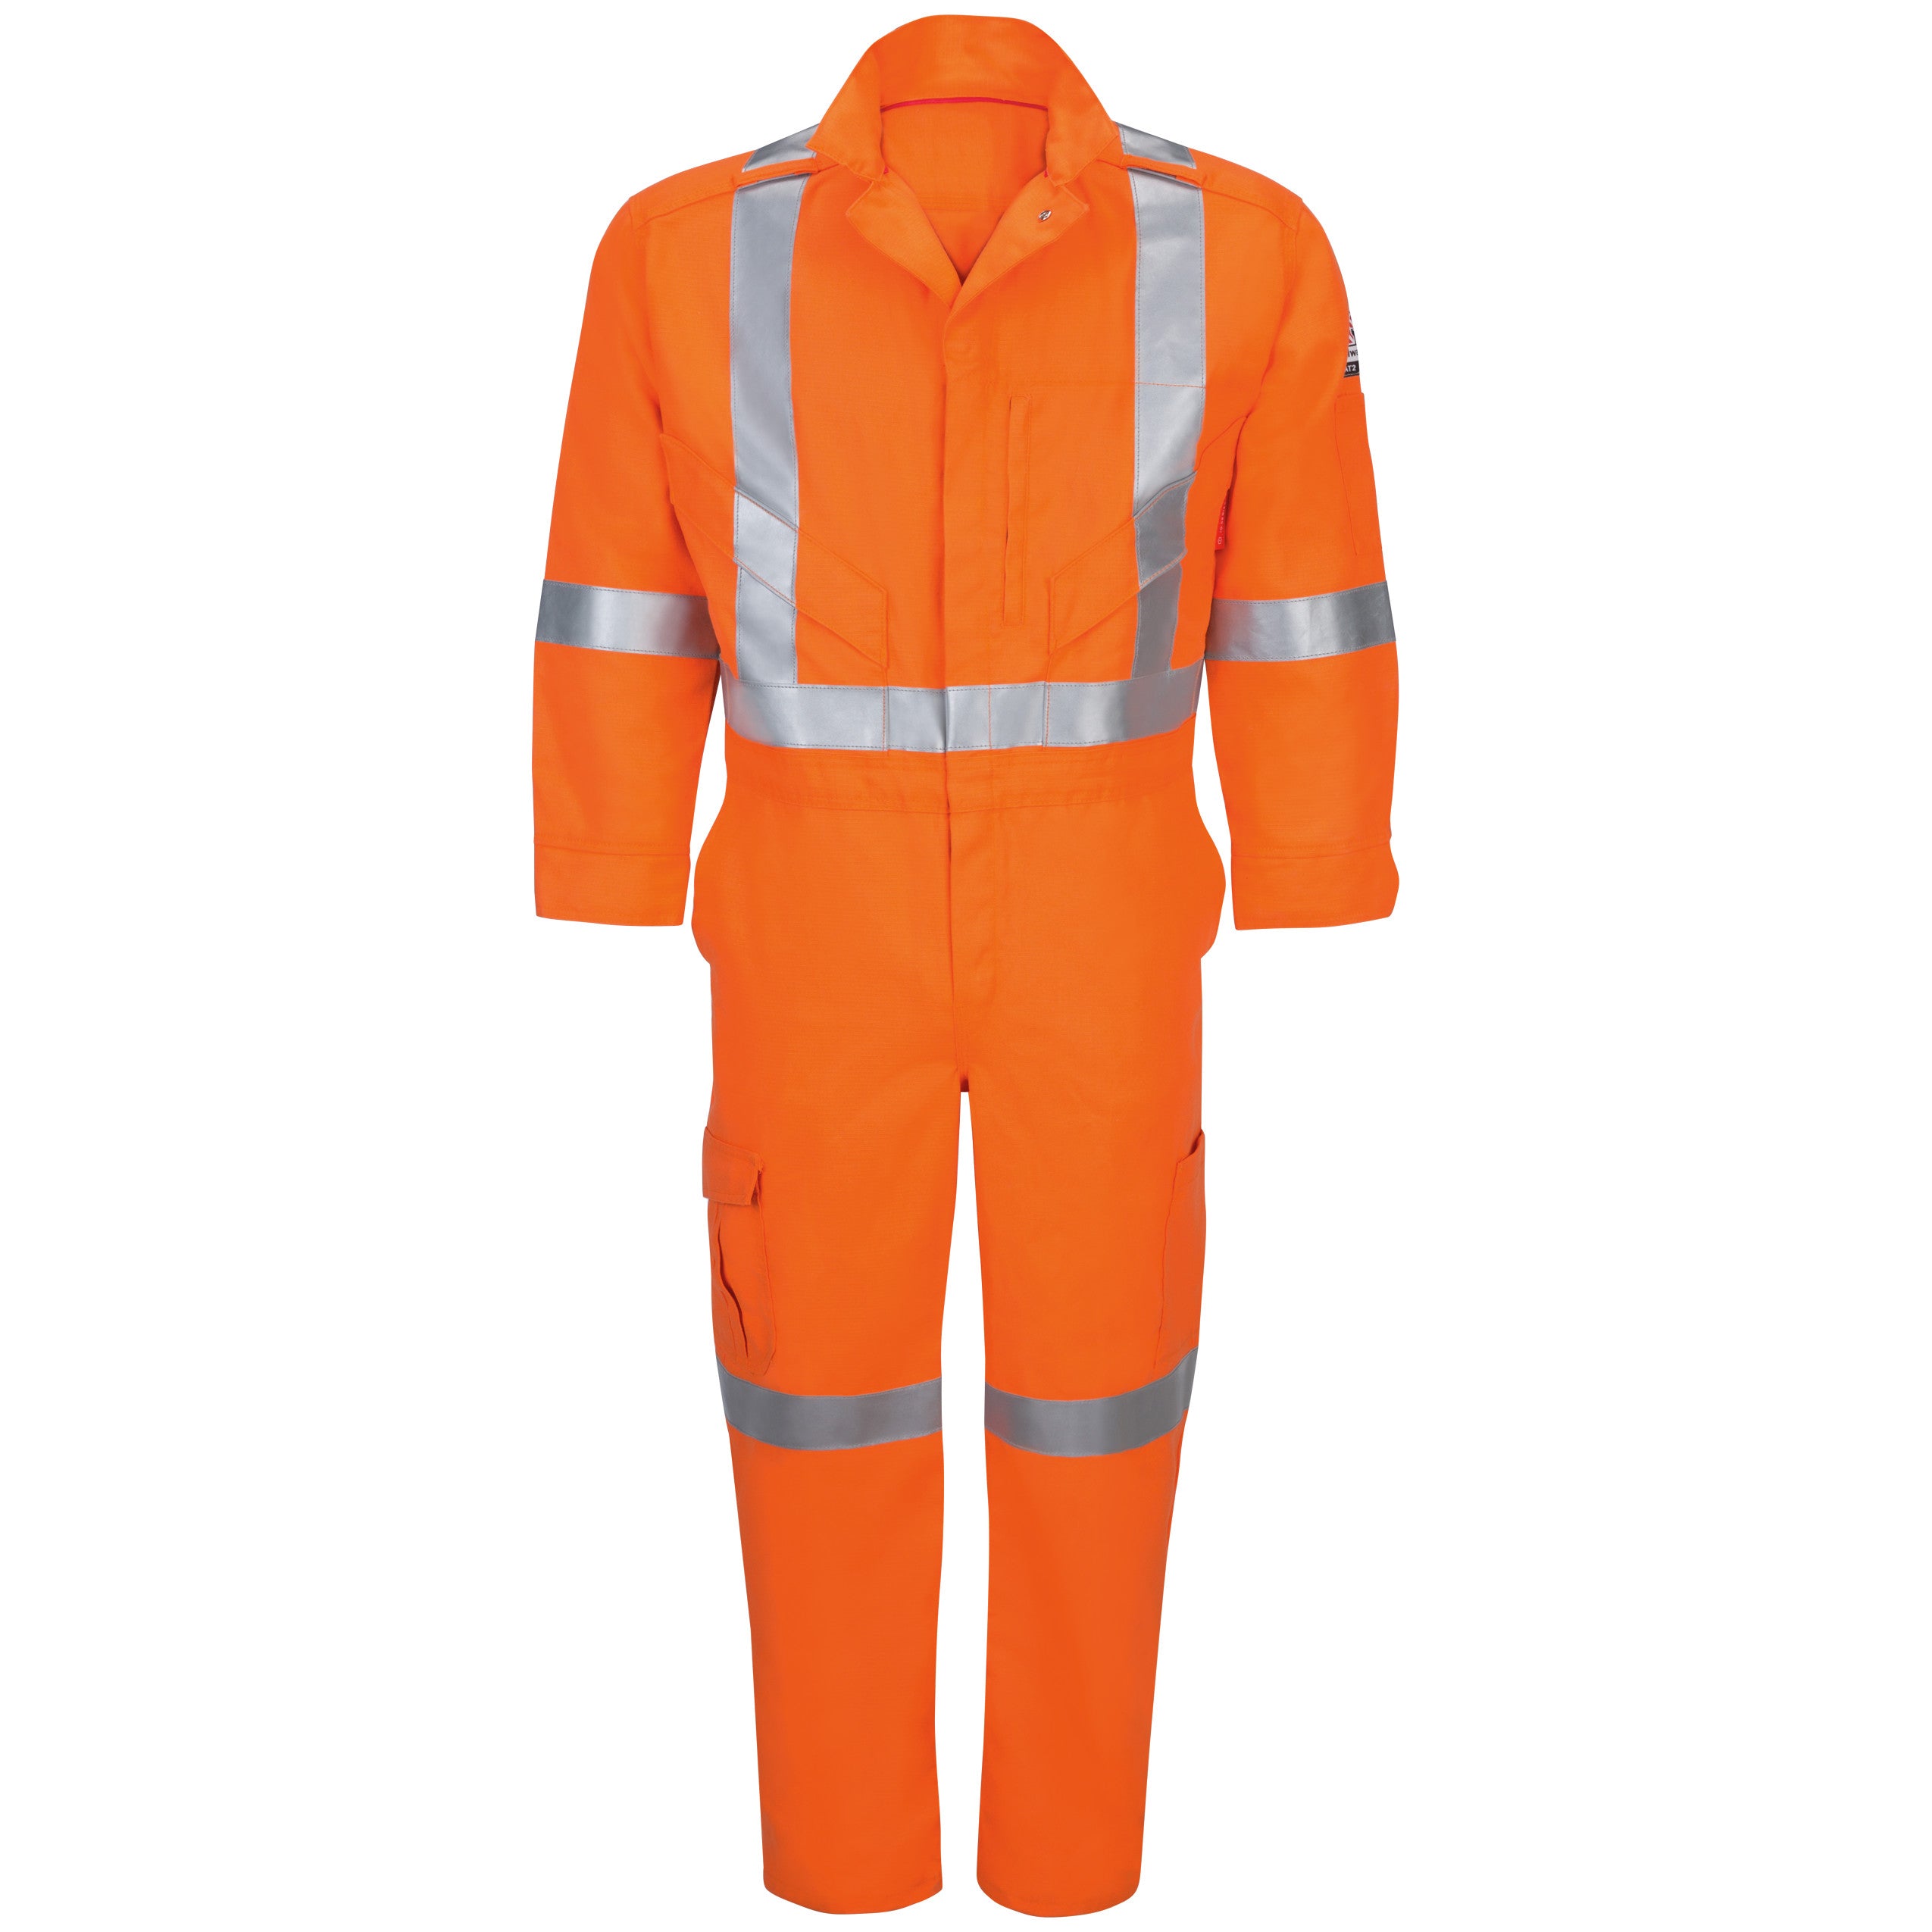 iQ Series® Endurance Collection Men's FR Premium Coverall with Reflective Trim QC12 - CSA Orange-eSafety Supplies, Inc